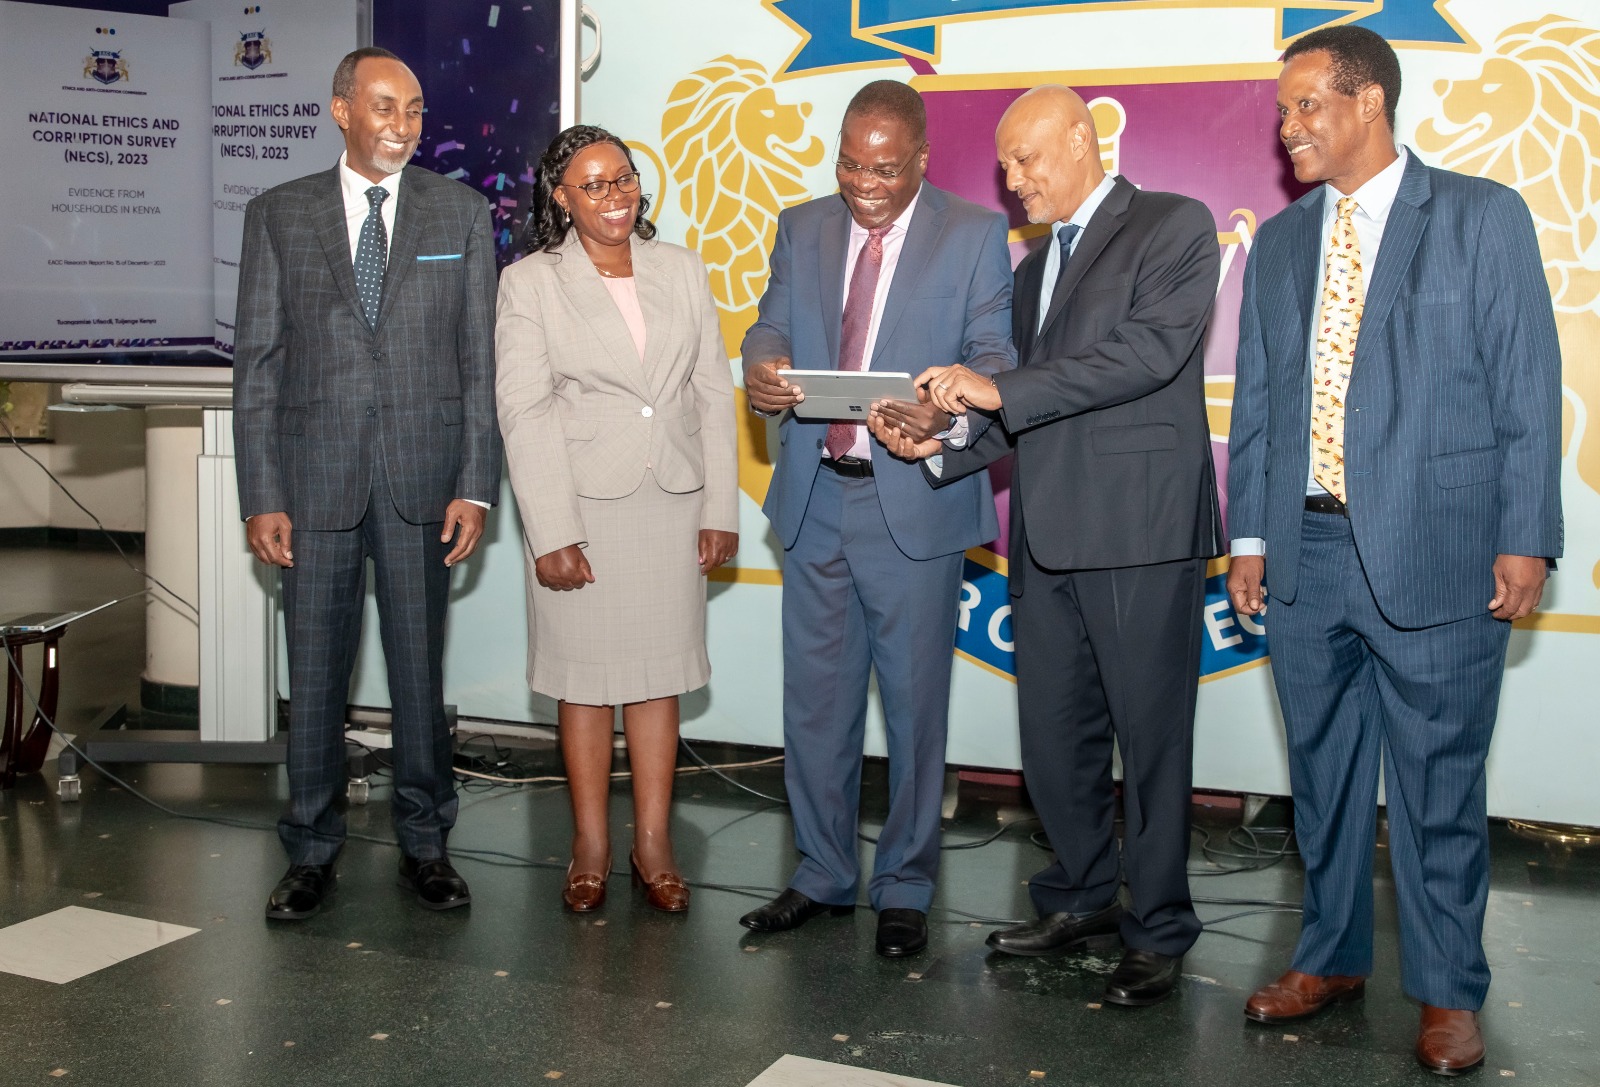 EACC launches the National Ethics and Corruption Survey Report 2023